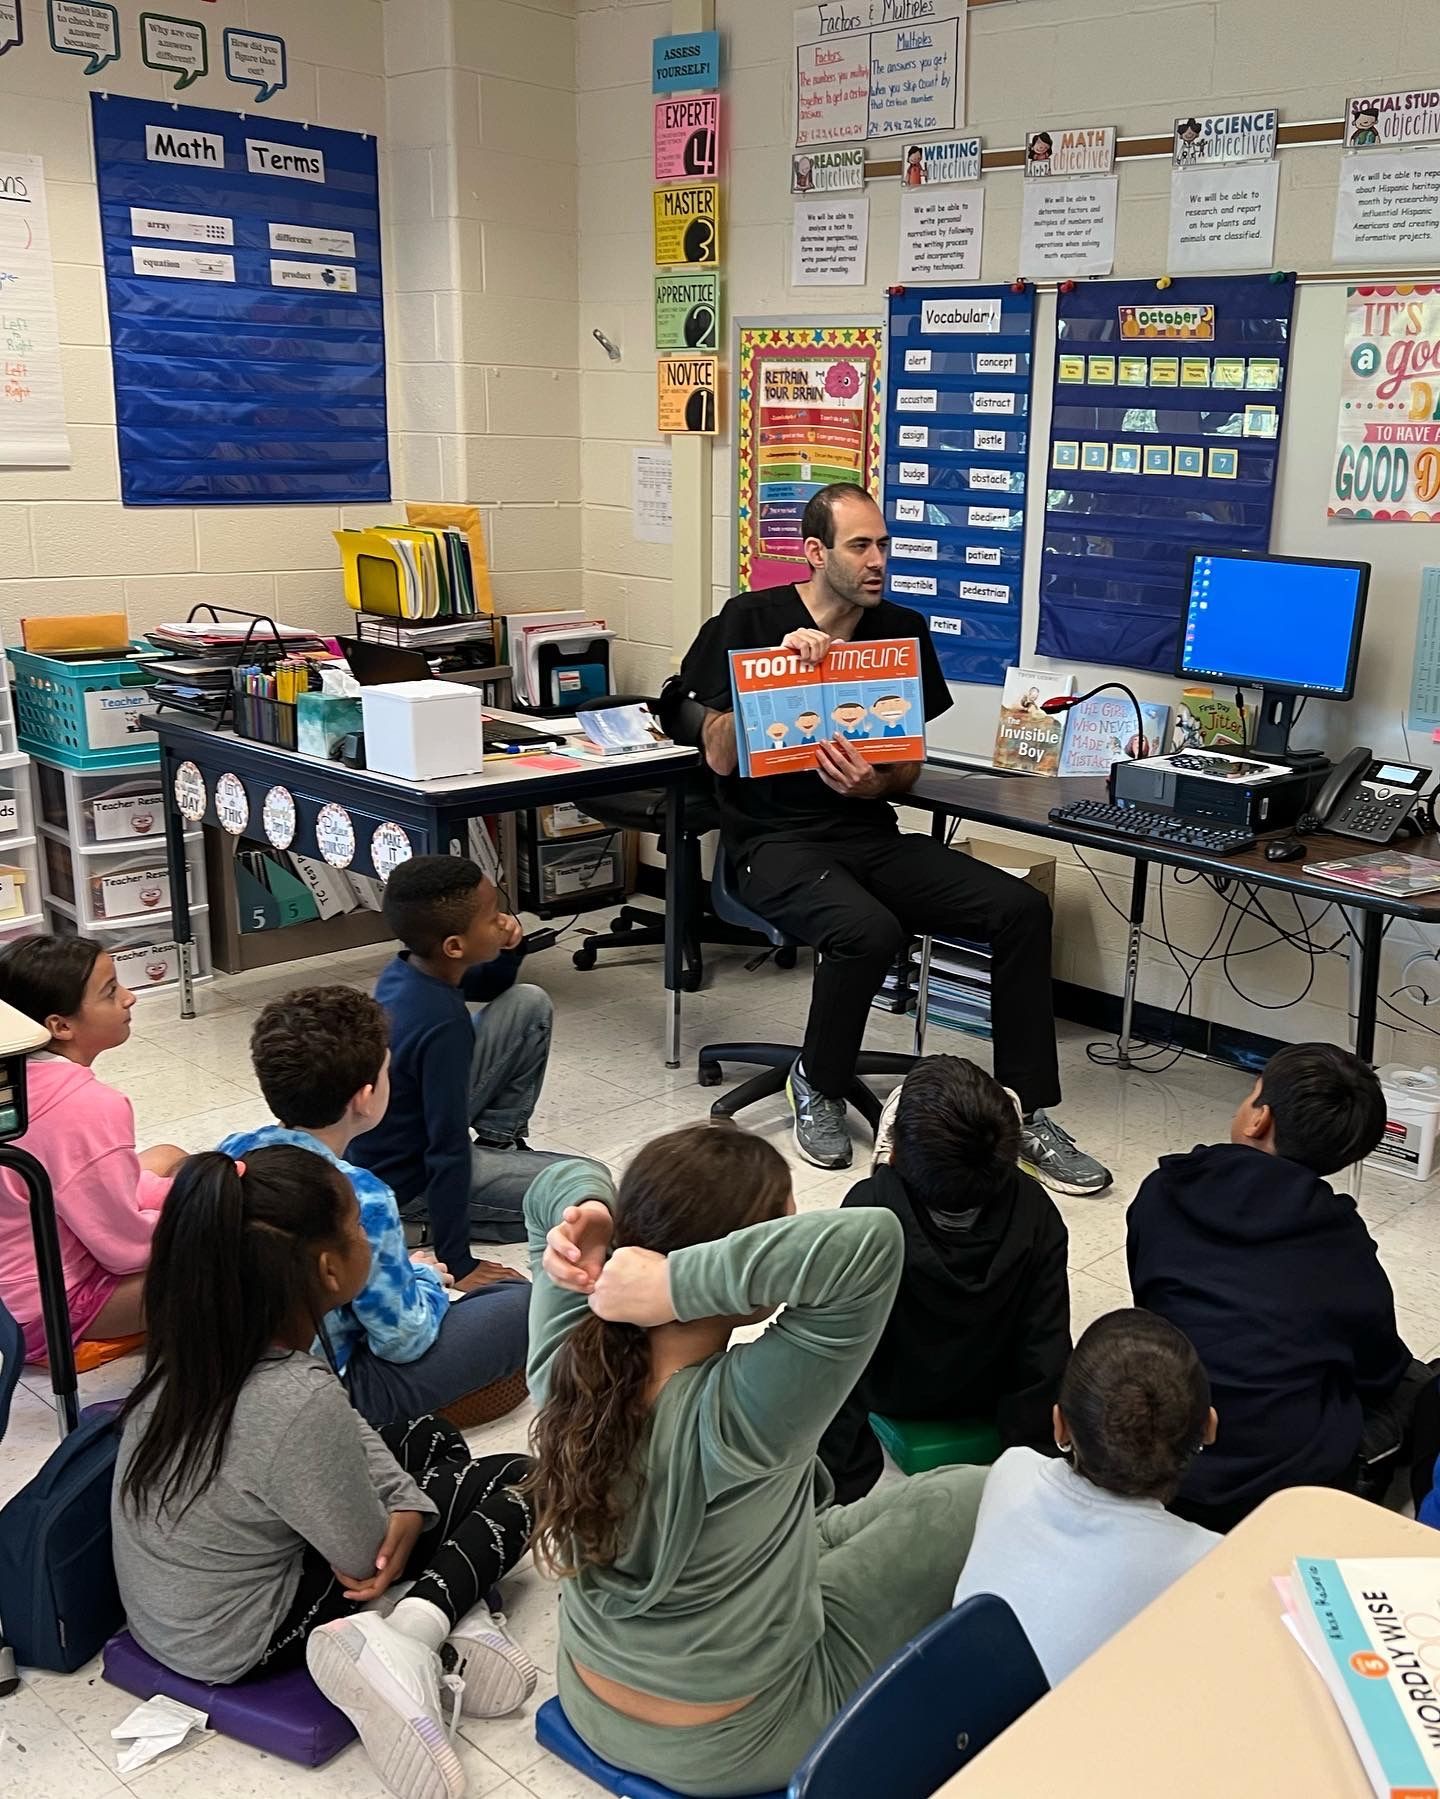 Dr. Chinitz Reading to Children at School | Orthodontist for Children in New Rochelle 10804 | Fix Bite Issues and Get Braces